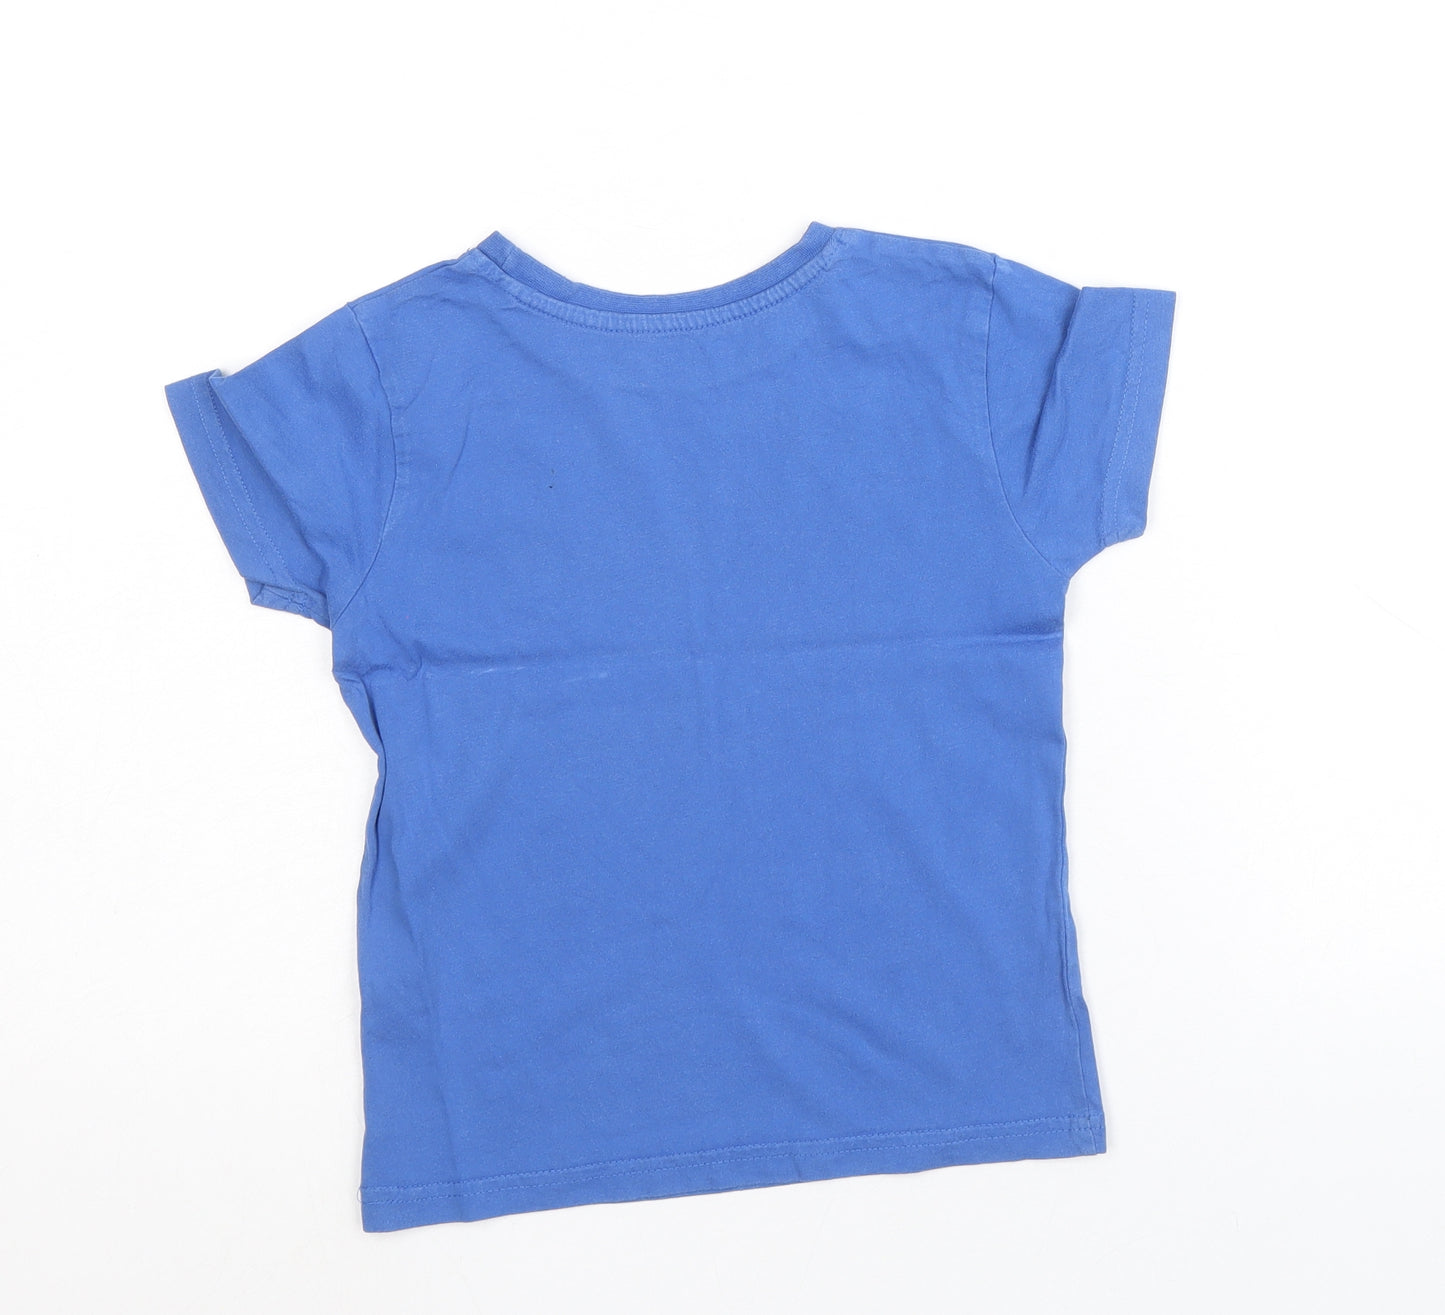 Primark Boys Blue 100% Cotton Basic T-Shirt Size 4-5 Years Round Neck Pullover - Born To Be Epic